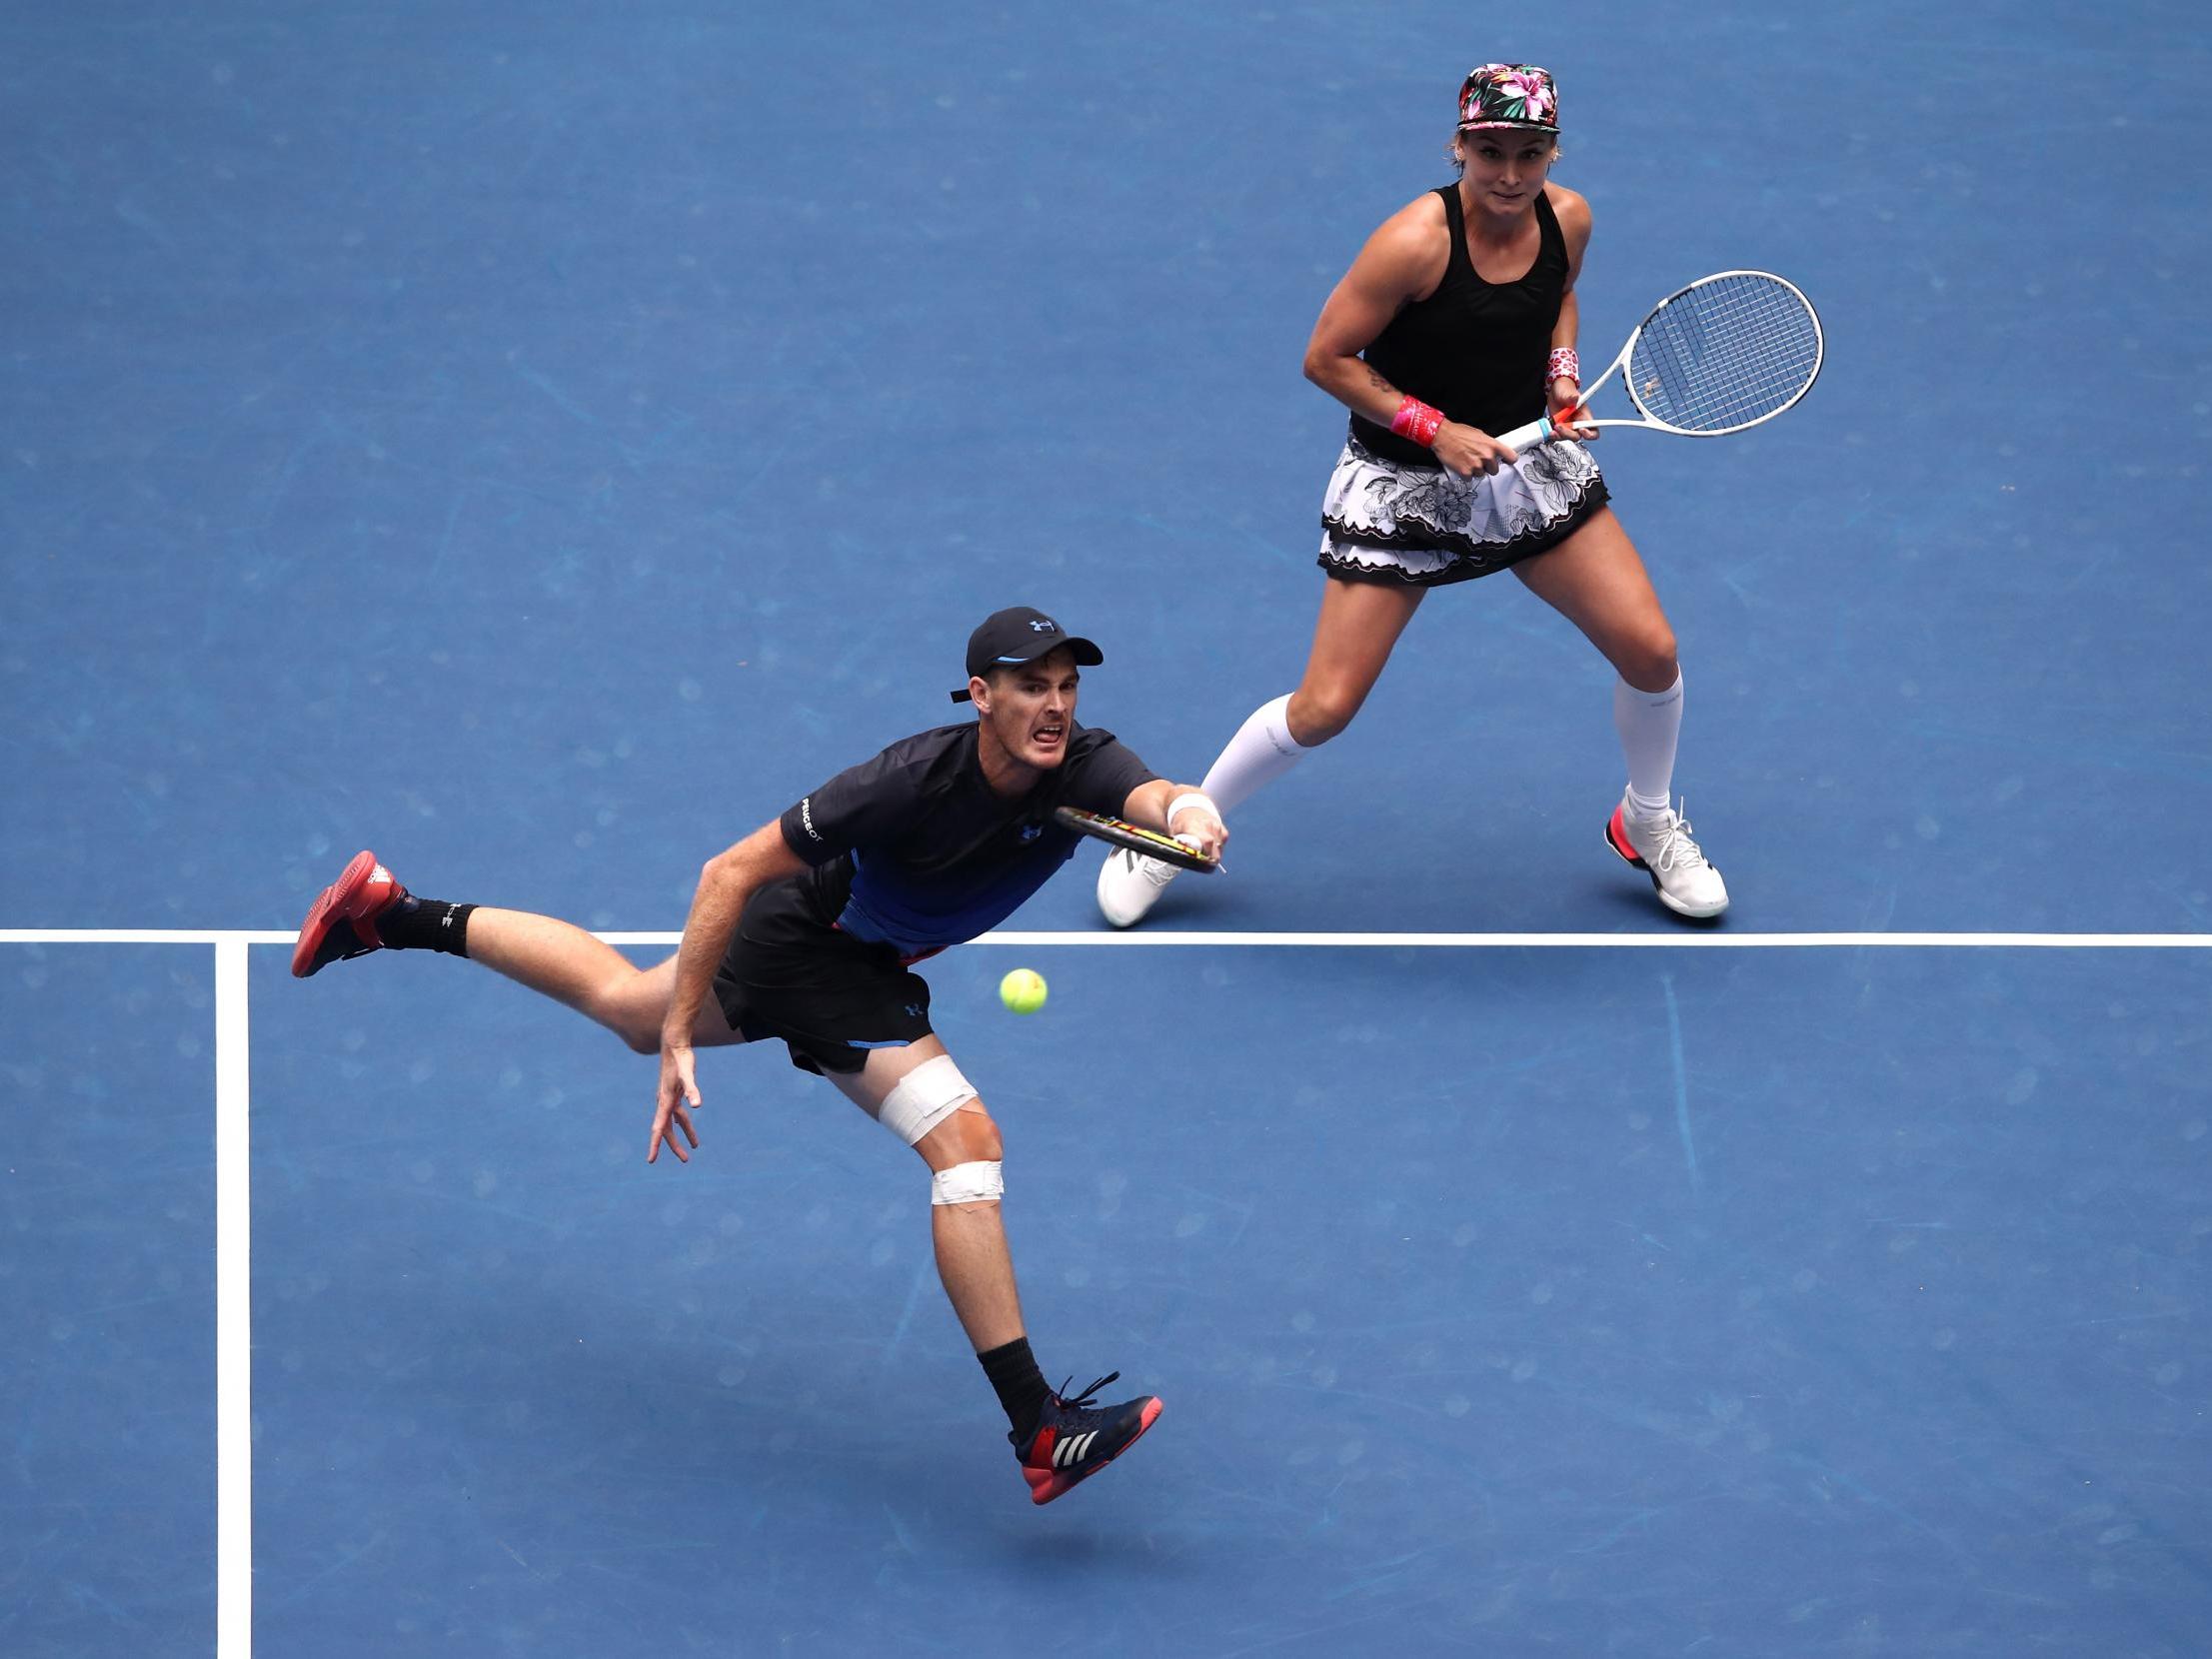 Murray and Mattek-Sands were favourites heading into the final